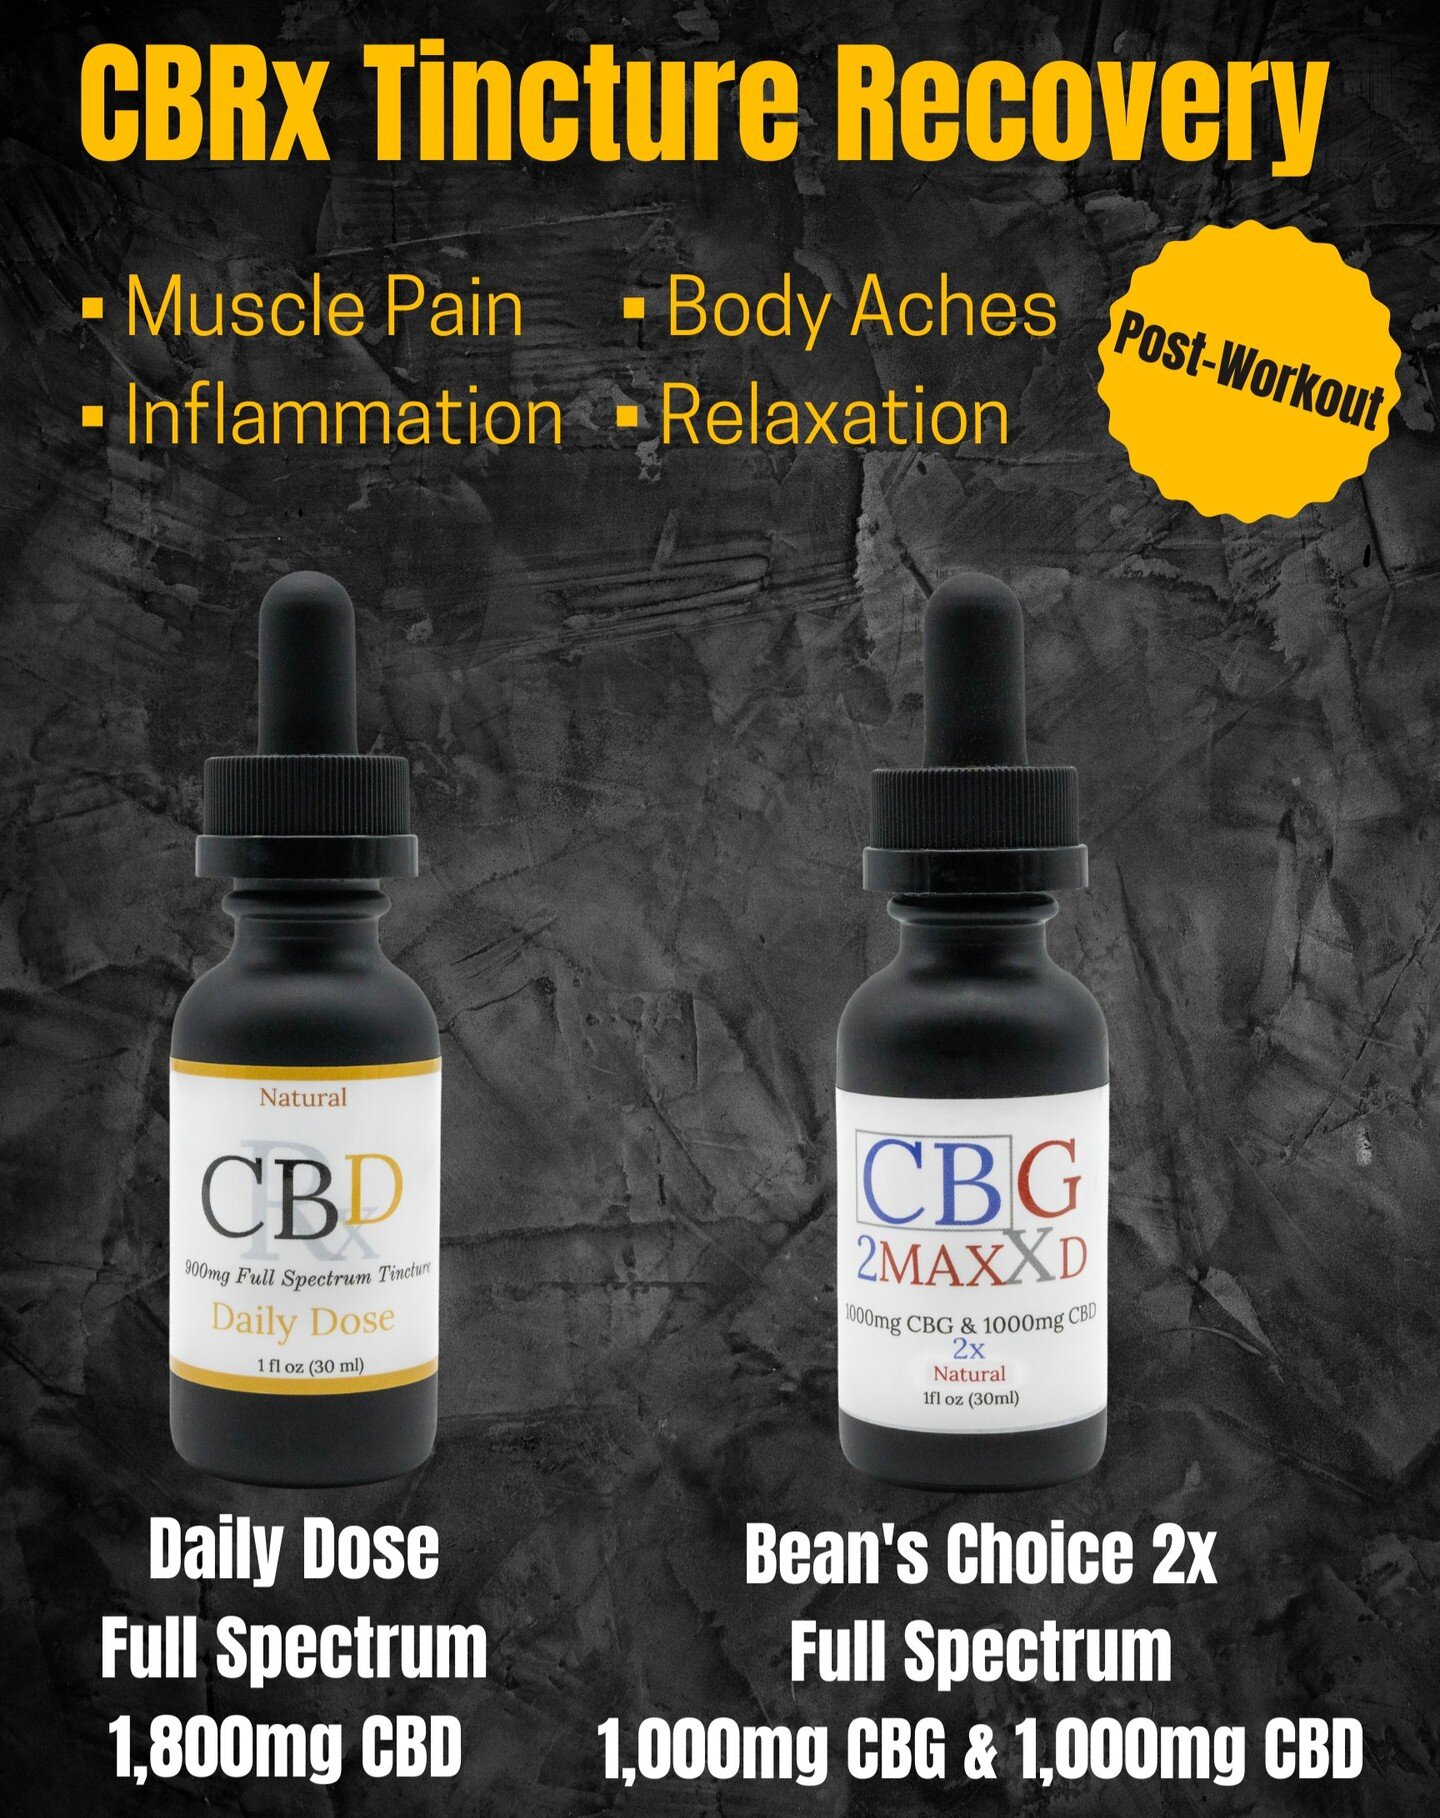 Say hello 👋 To faster workout recovery with CBD &amp; CBG! 👏 We're talking muscle pain, body aches, inflammation, relaxation &amp; more! 🙌 
🔸 Daily Dose 2x 🔸 
Full Spectrum 1,800mg CBD - Straight up CBD, get to the point, no BS.
🔸 Bean's Choice